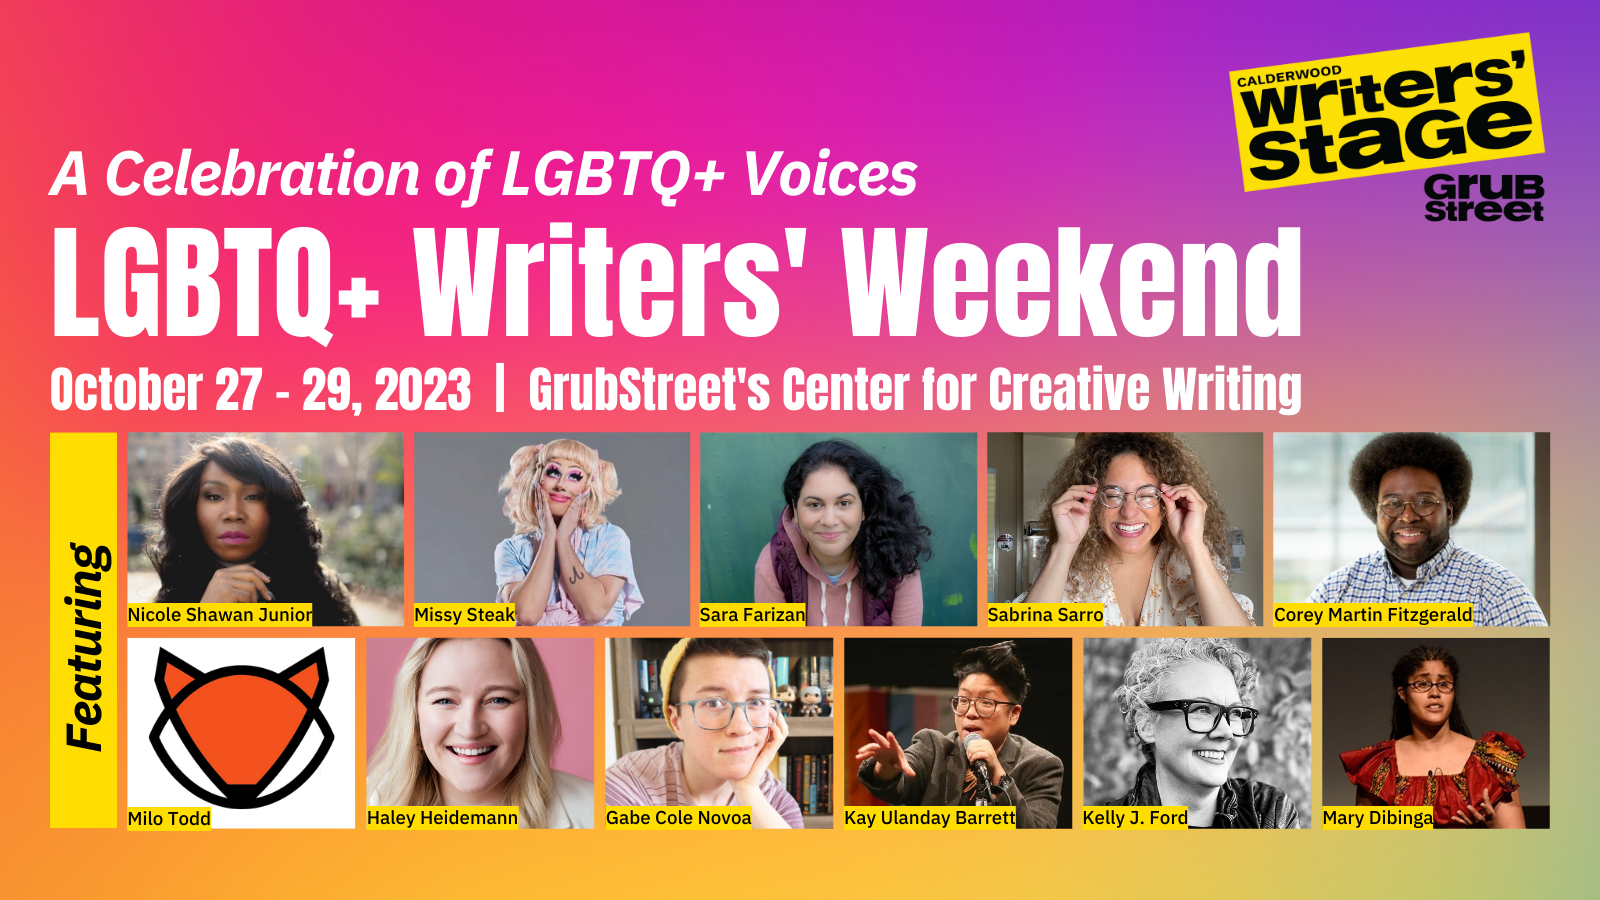 A multi-colored rectangle that says "A Celebration of LGBTQ+ Voices. LGBTQ+ Writers' Weekend. October 27 to 29, 2023. GrubStreet's Center for Creative Writing. Featuring Nicole Shawan Junior, Missy Steak, Sara Farizan, Sabrina Sarro, Corey Martin Fitzgerald, Milo Todd, Haley Heidemann, Gabe Cole Novoa, Kay Ulanday Barrett, Kelly J. Ford, Mary Dibinga. Each name includes a square photo of the given person.